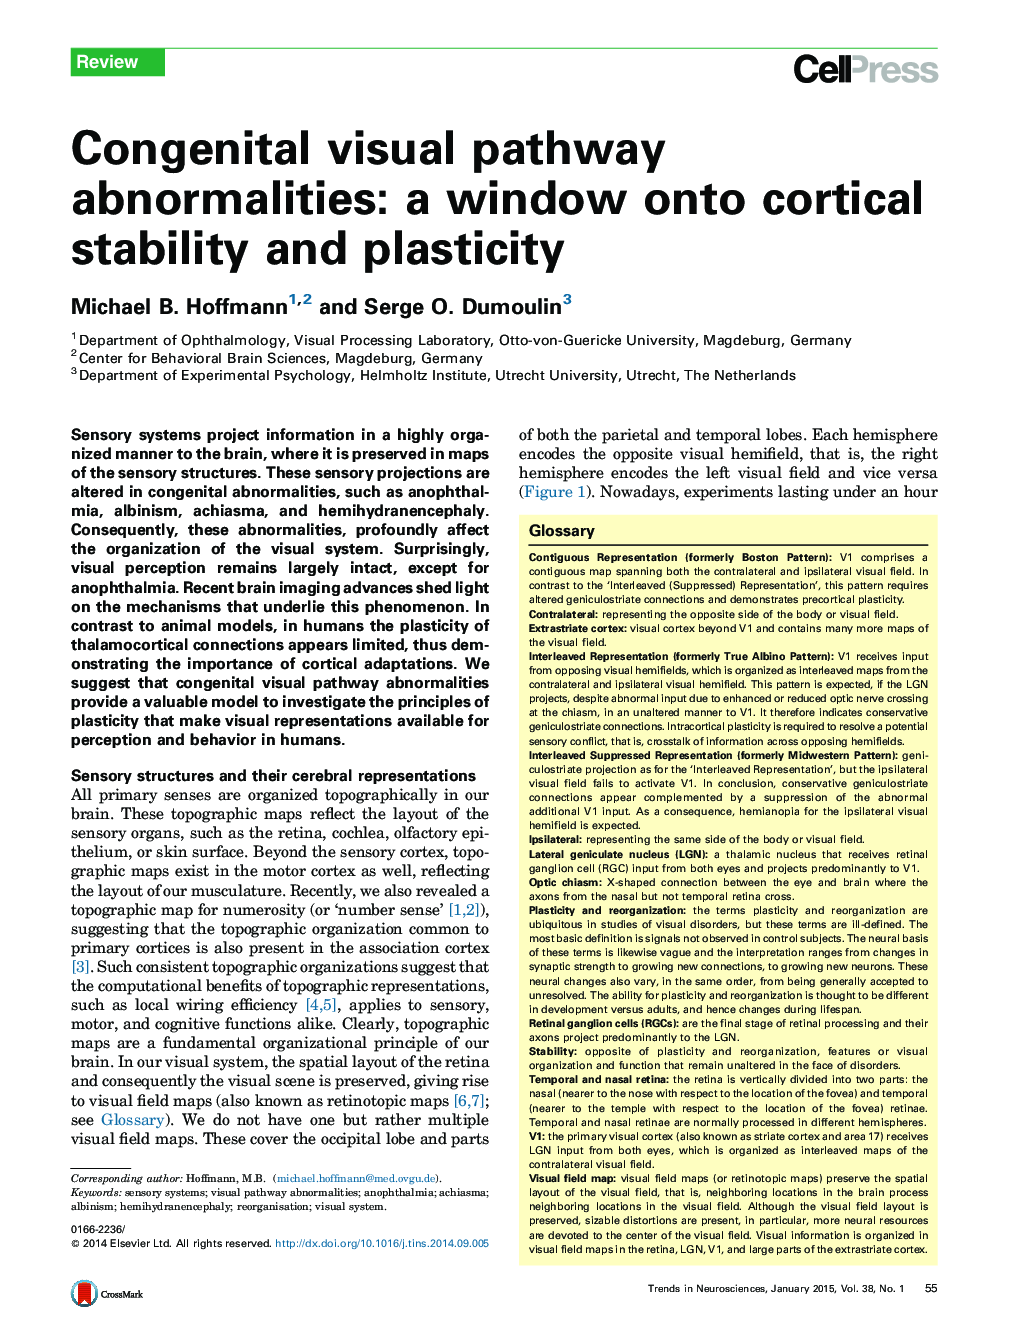 Congenital visual pathway abnormalities: a window onto cortical stability and plasticity